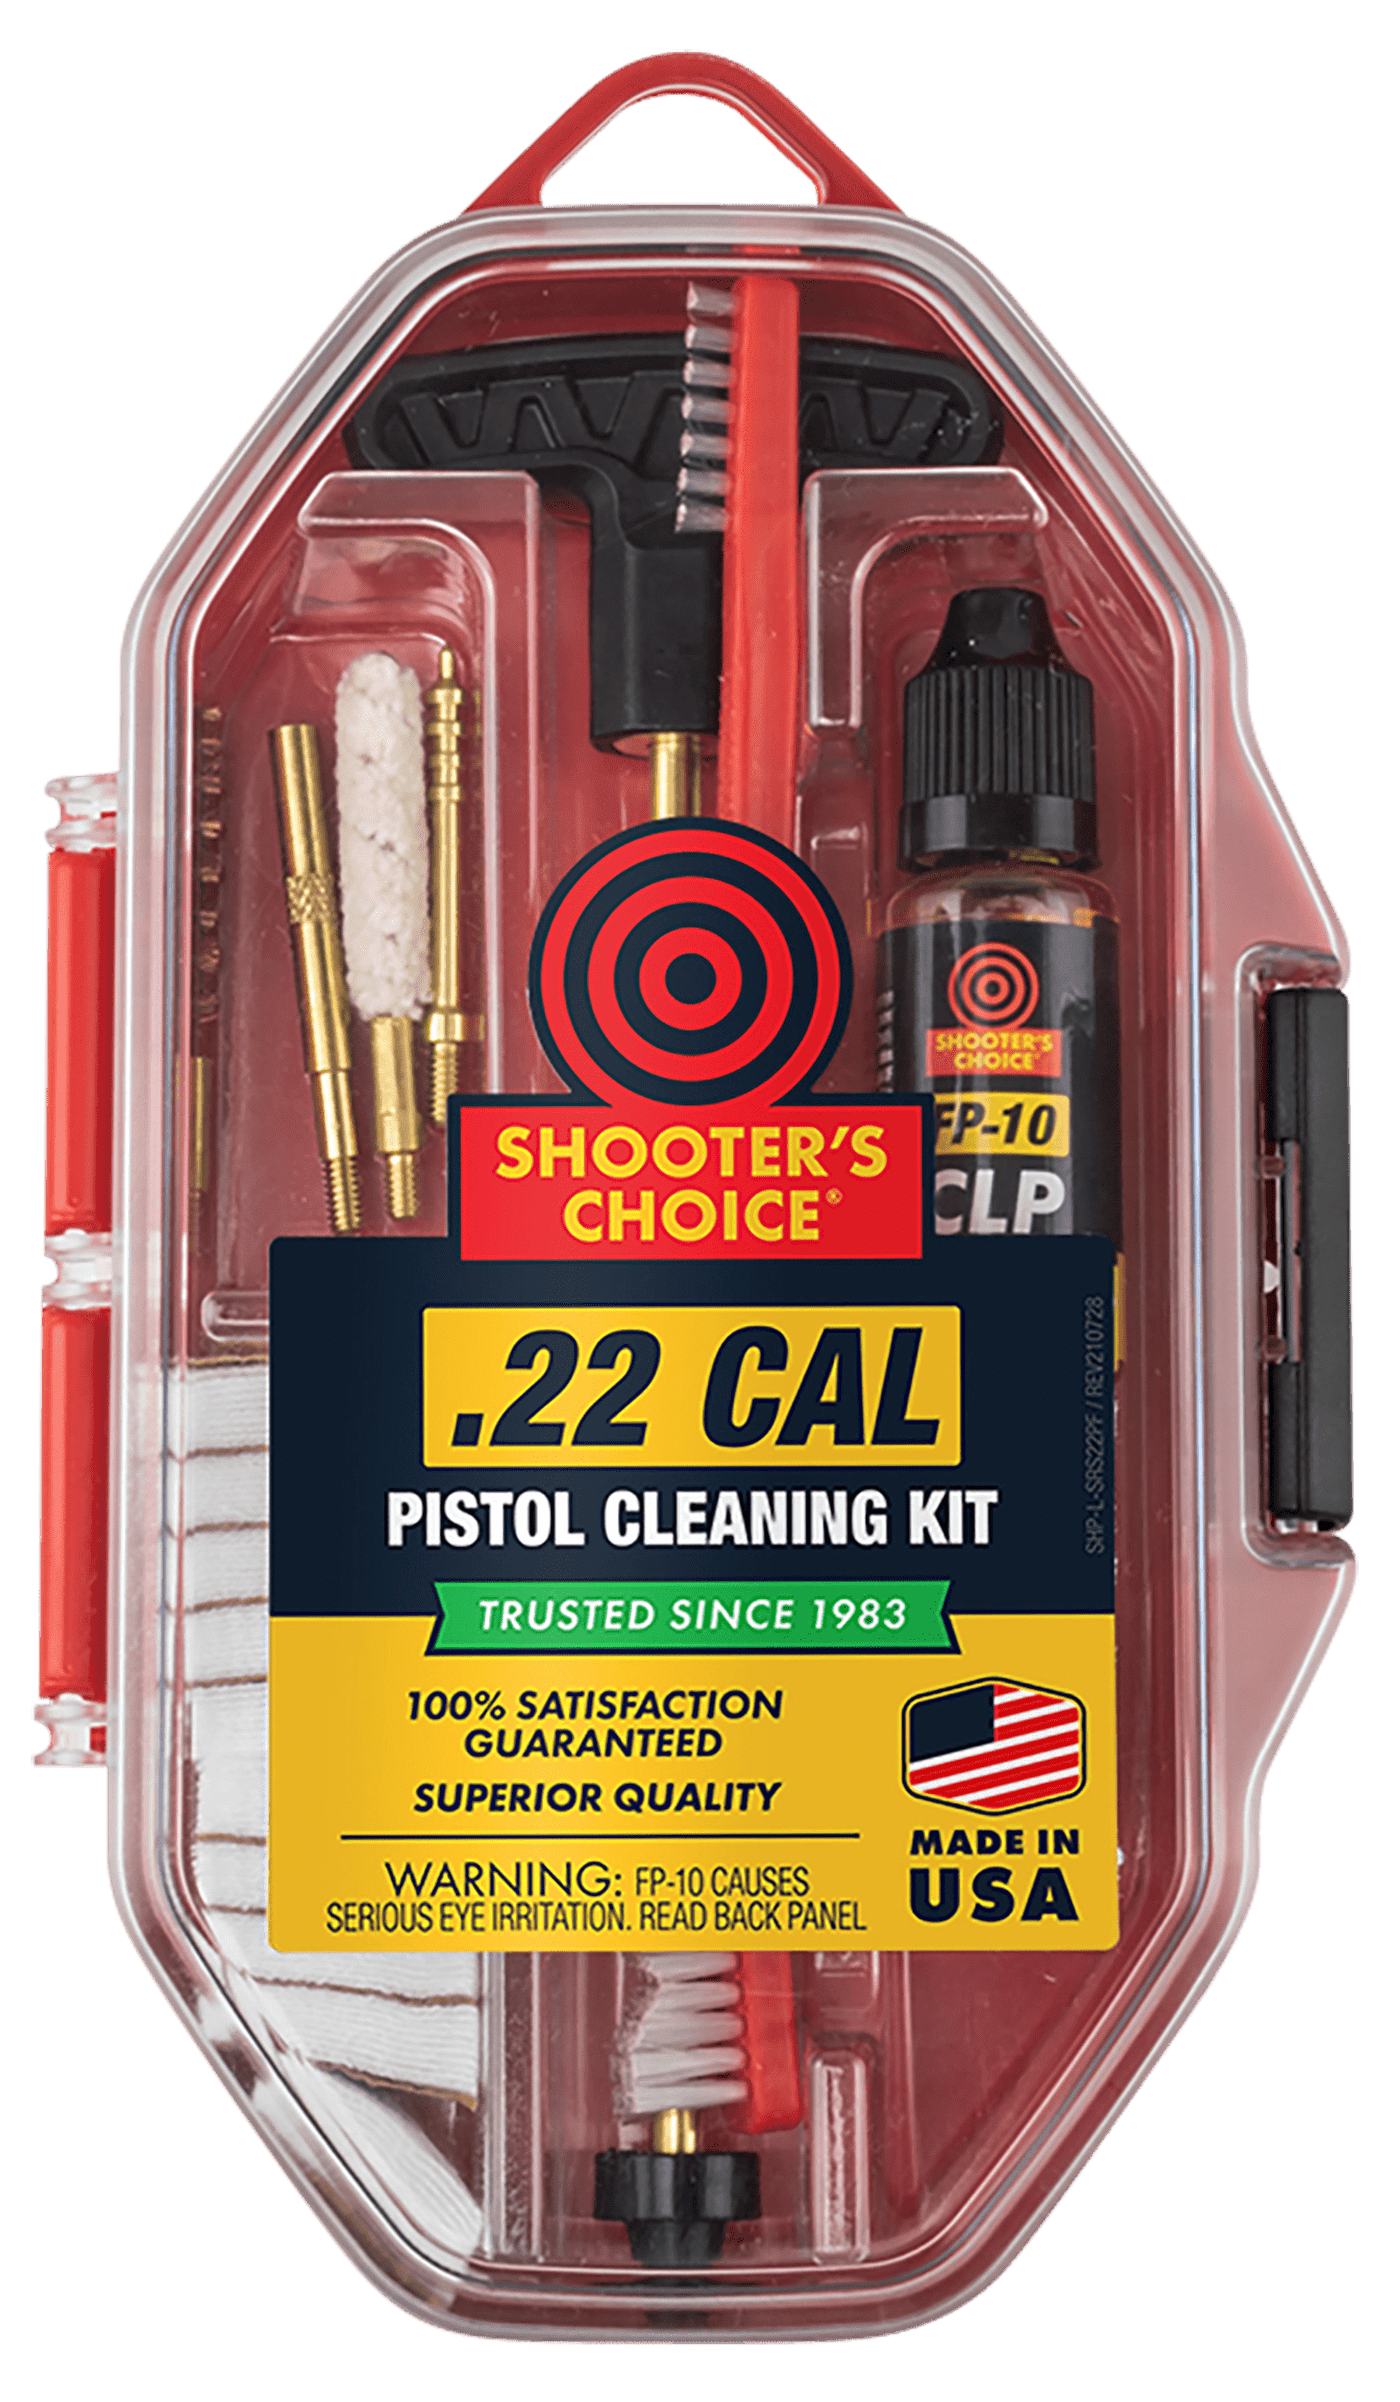 Shooters Choice Shooters Choice Cleaning Kit, Shf  Srs-22p    22 Pistol Gun Cleaning Kit Gun Care